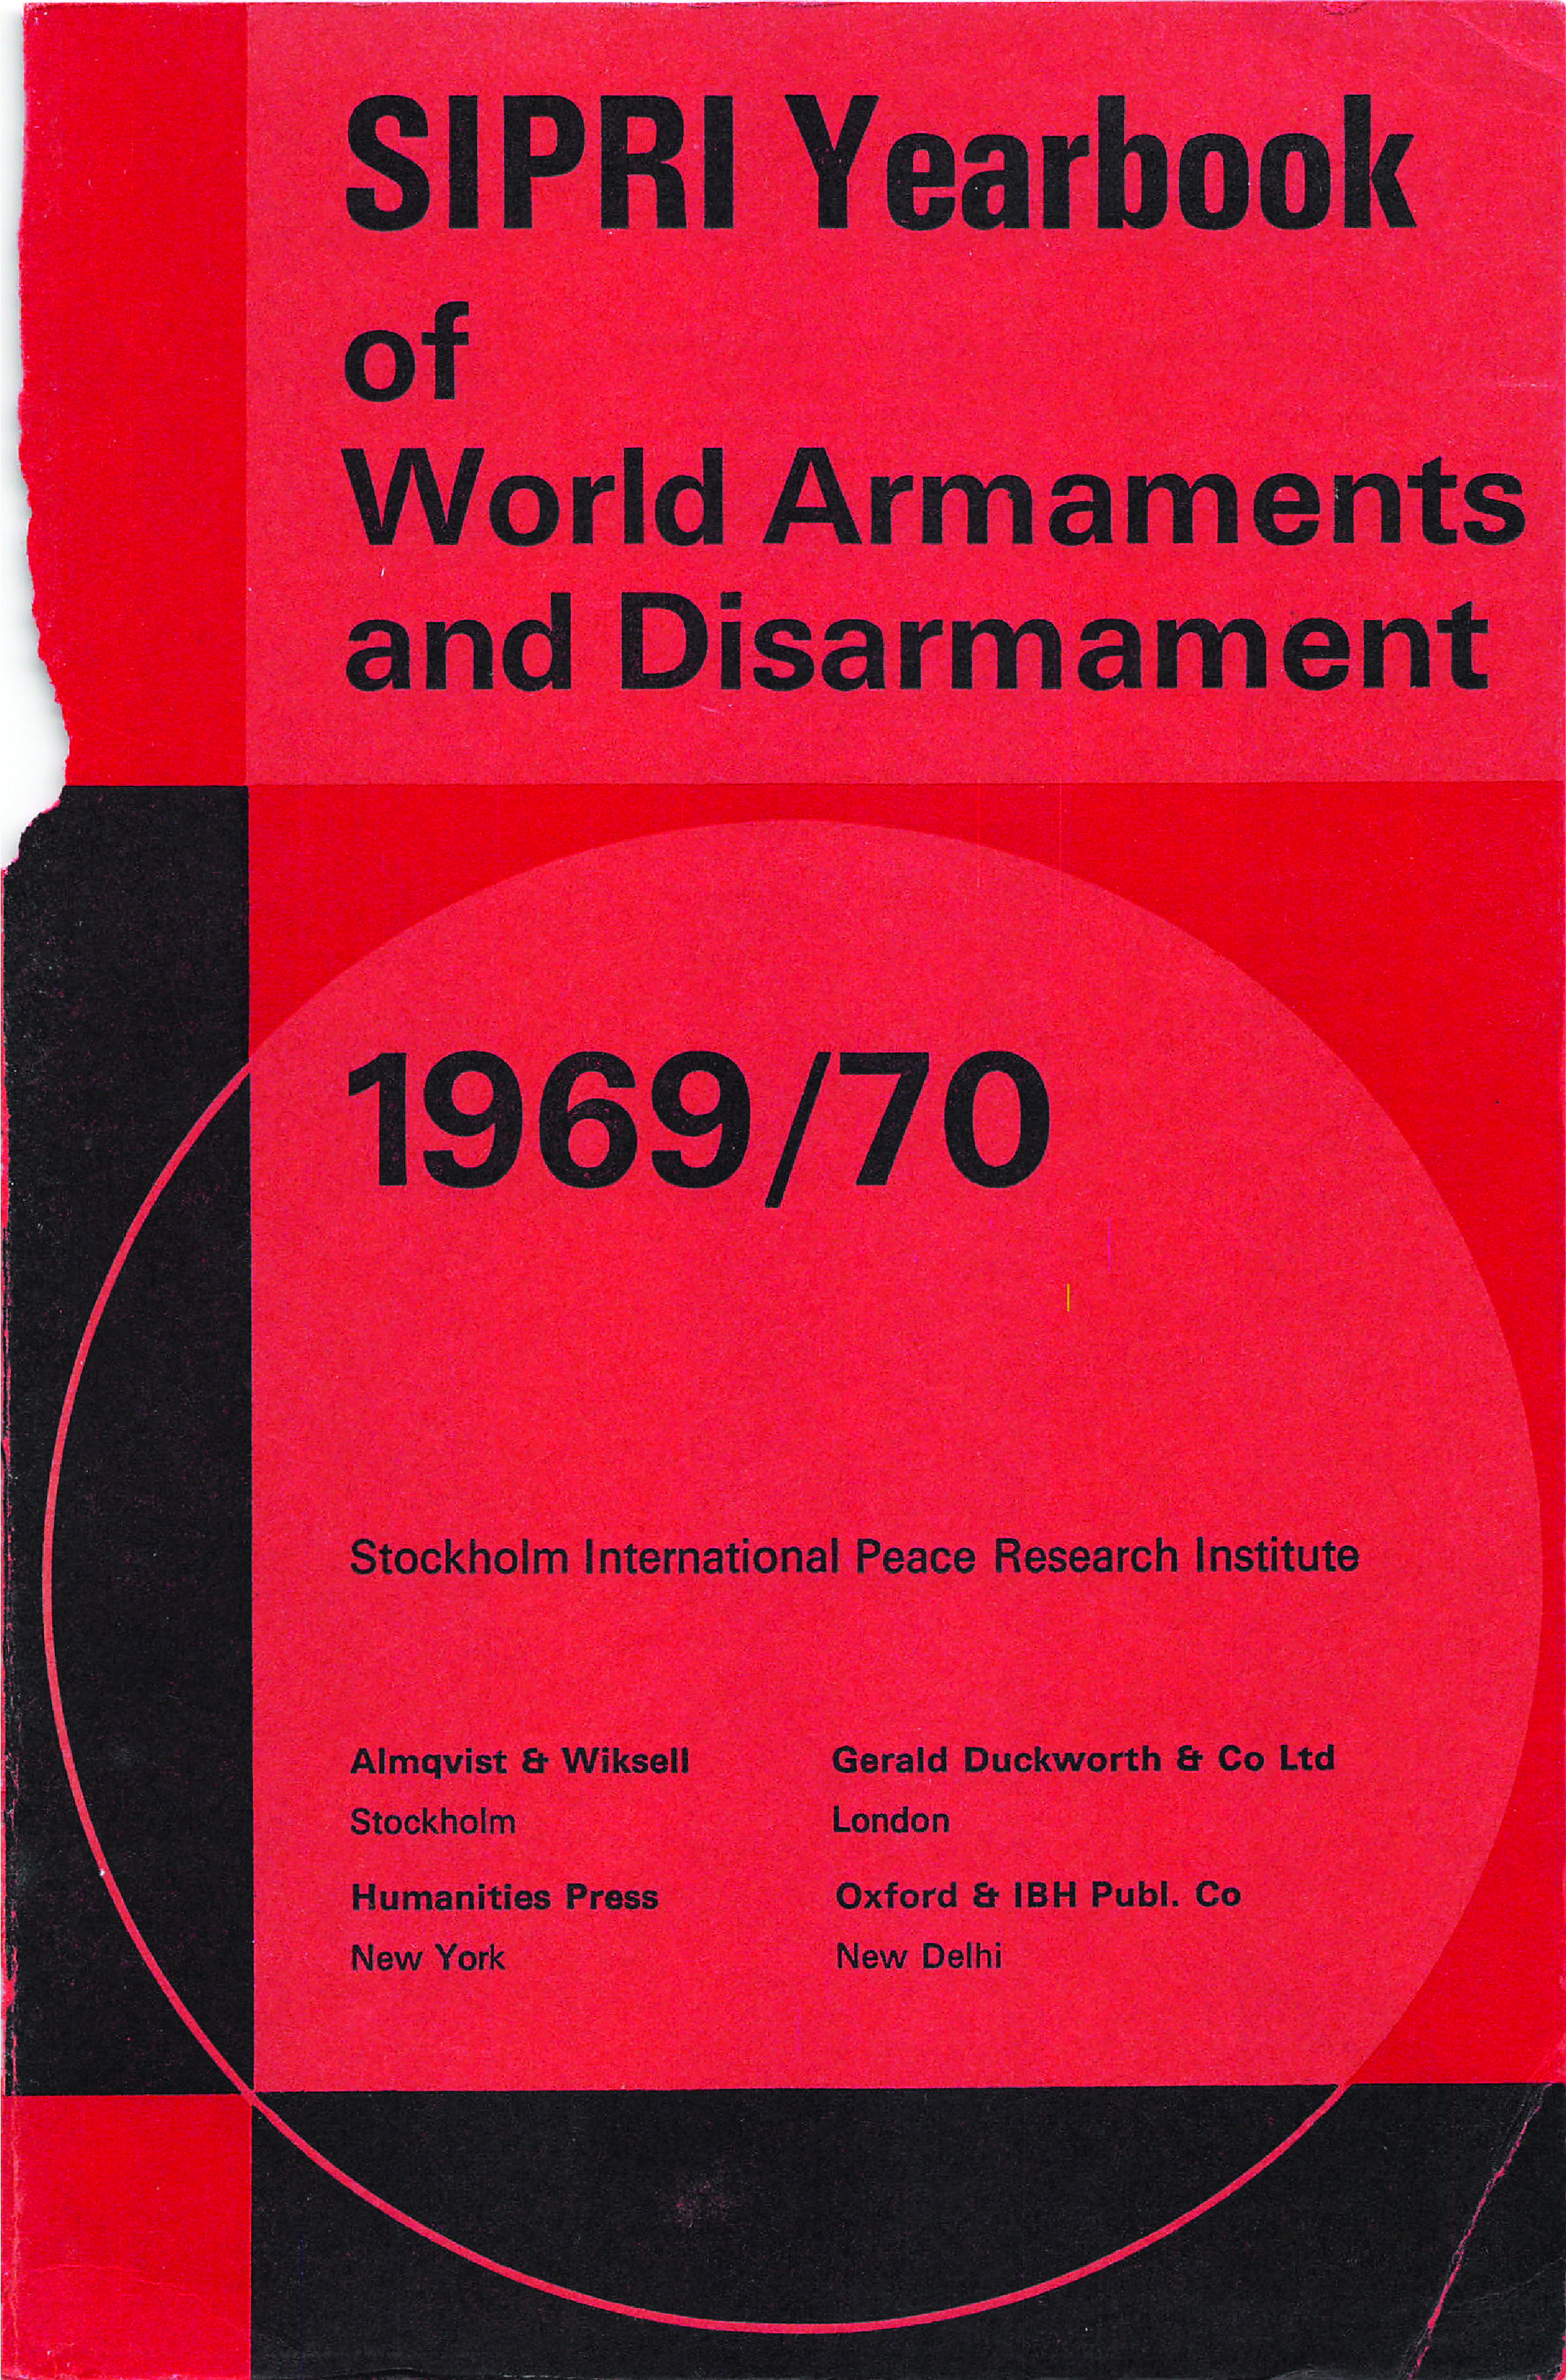 SIPRI yearbook 1969-70 cover